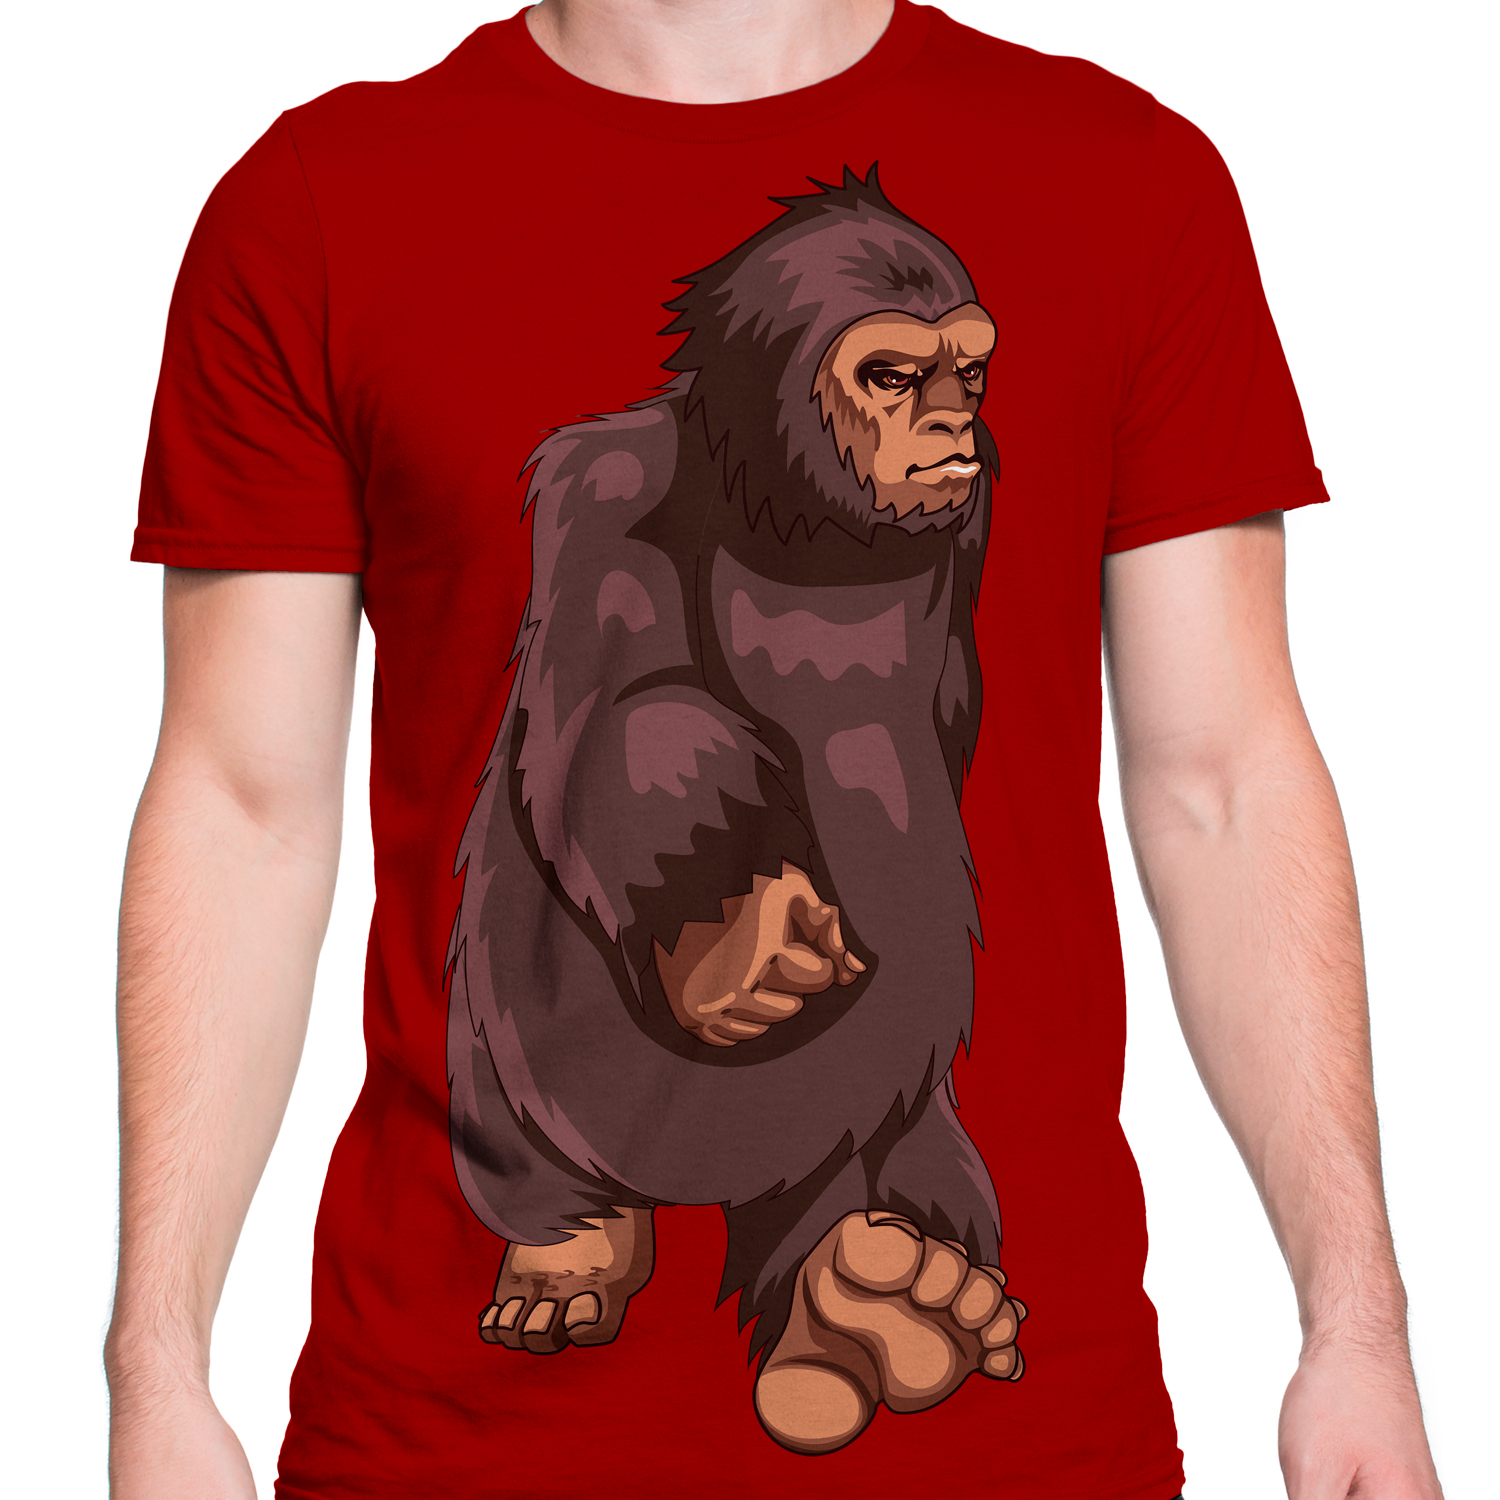 Man wearing a red shirt with a gorilla on it.